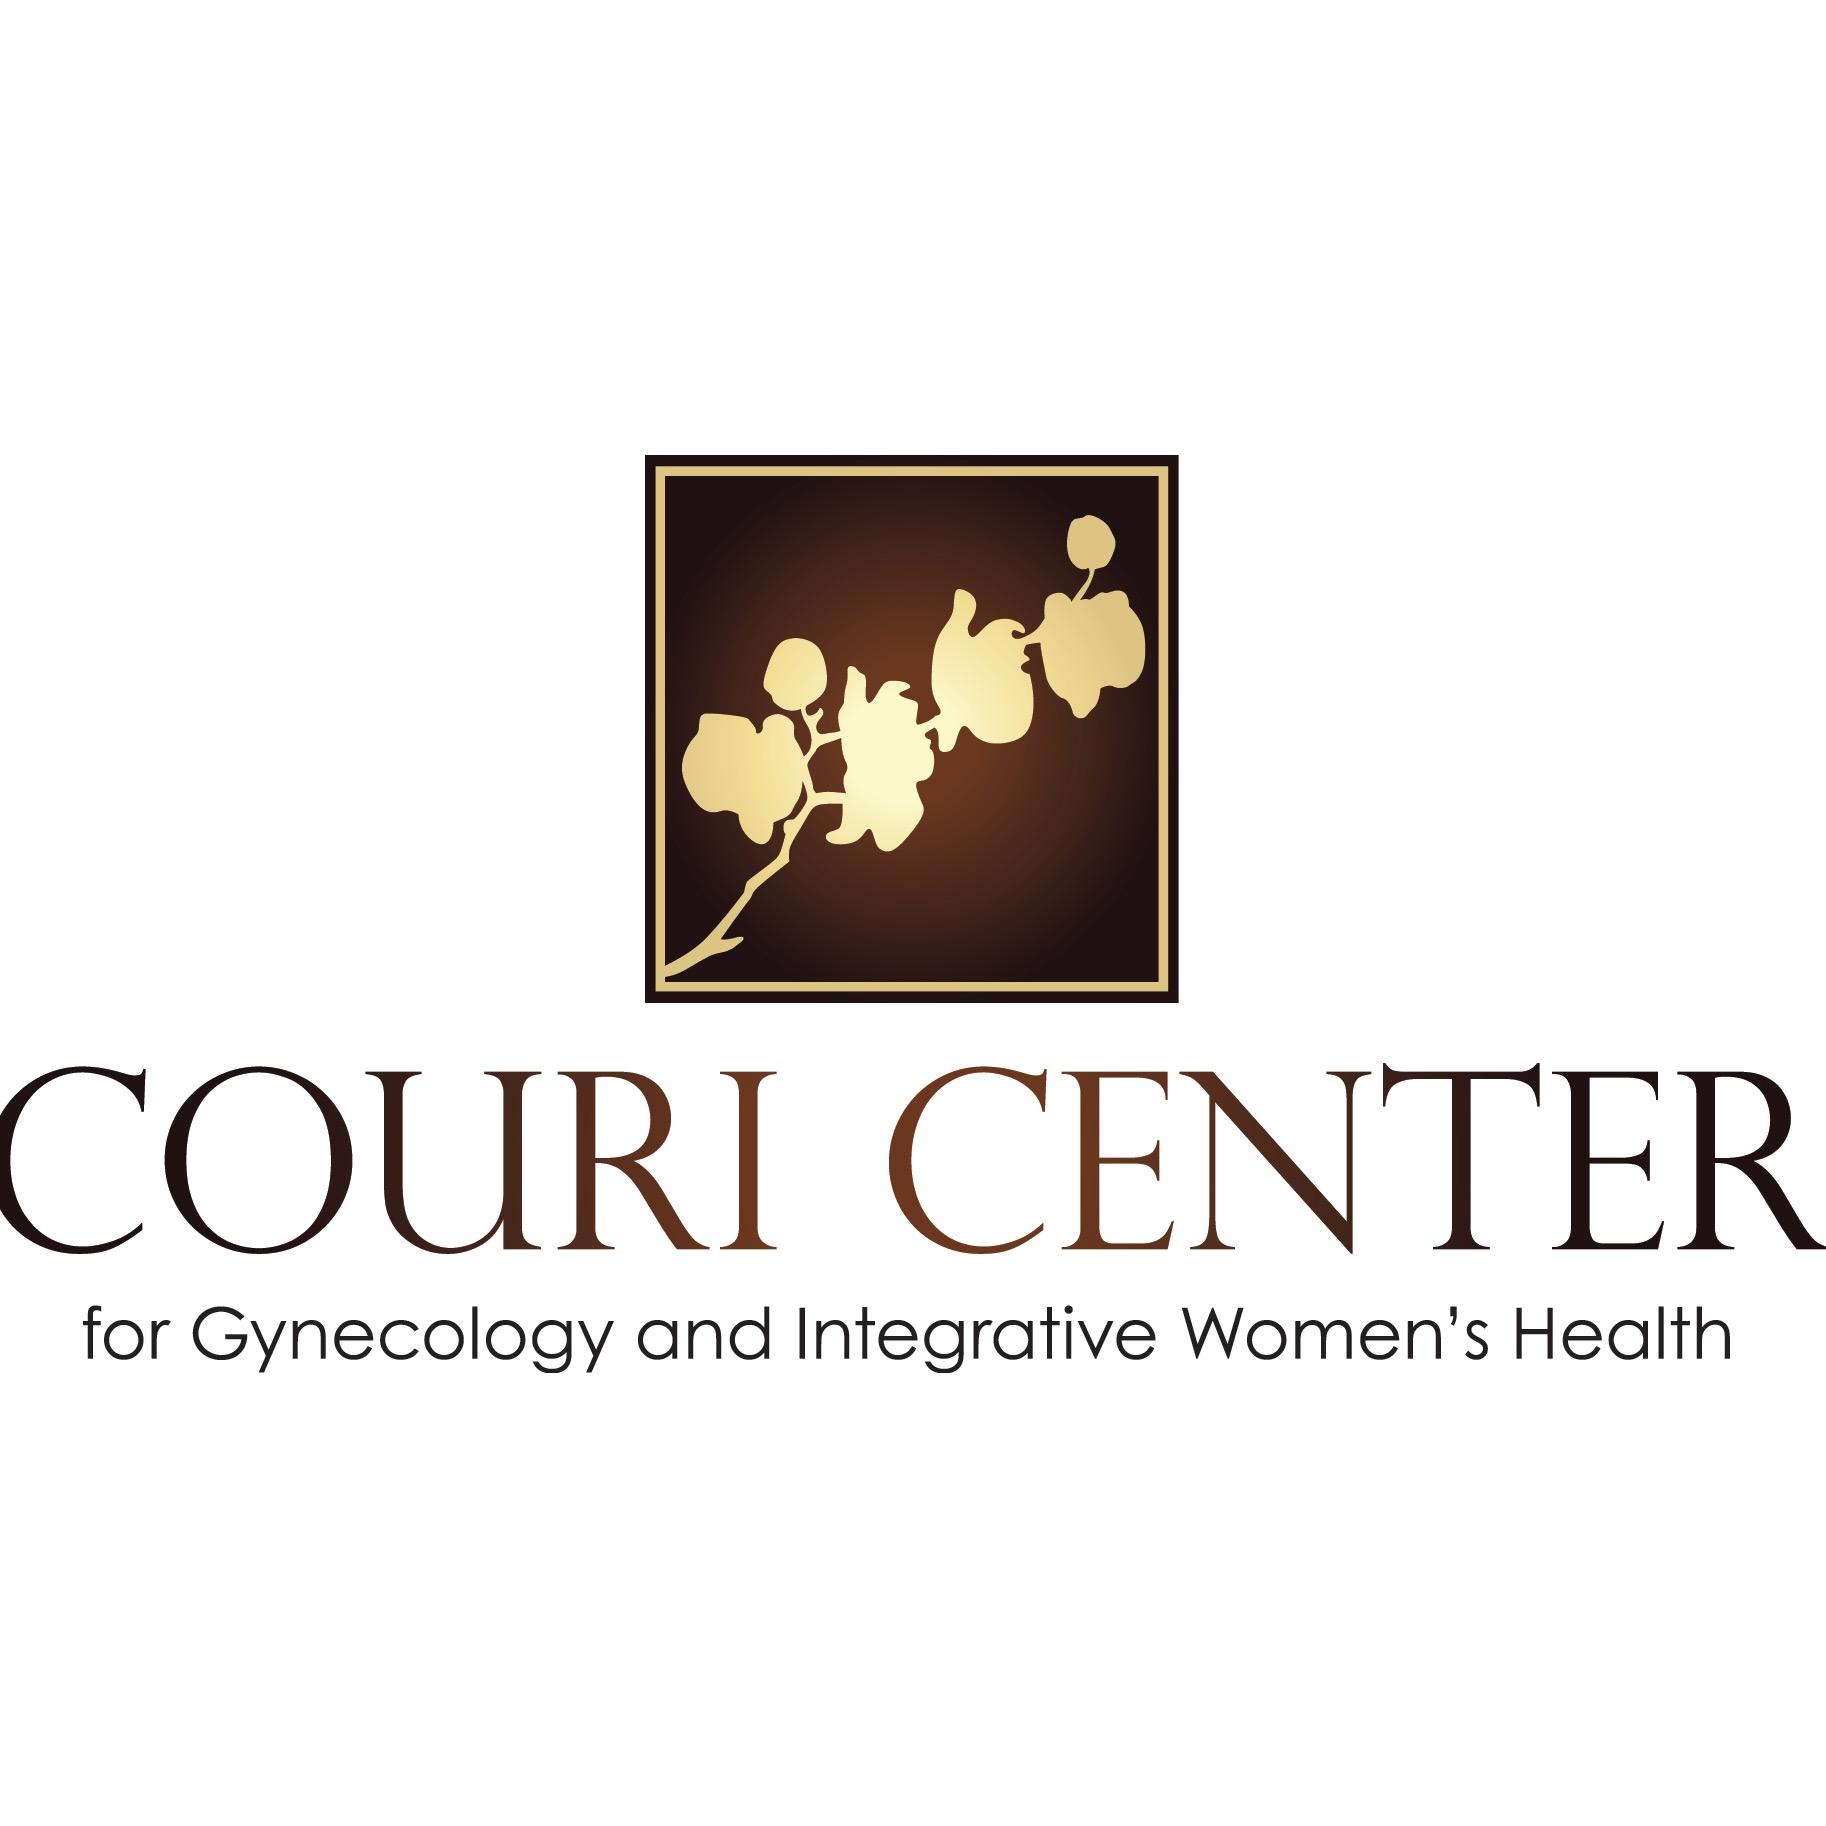 Couri Center for Gynecology and Integrative Women's Health Logo